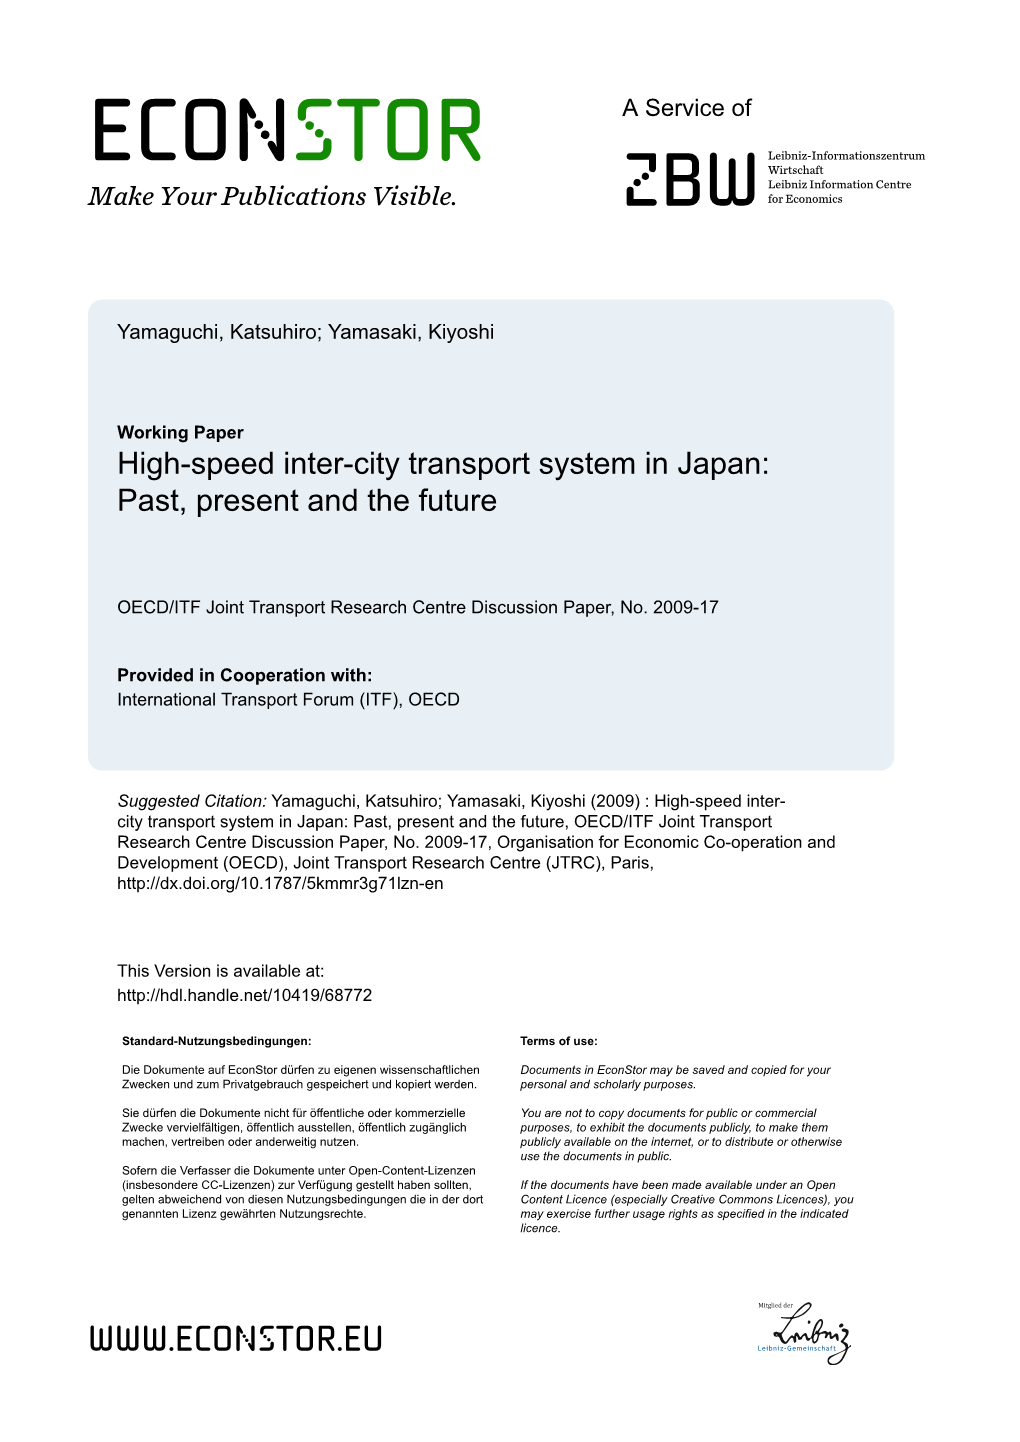 High-Speed Inter-City Transport System in Japan: Past, Present and the Future